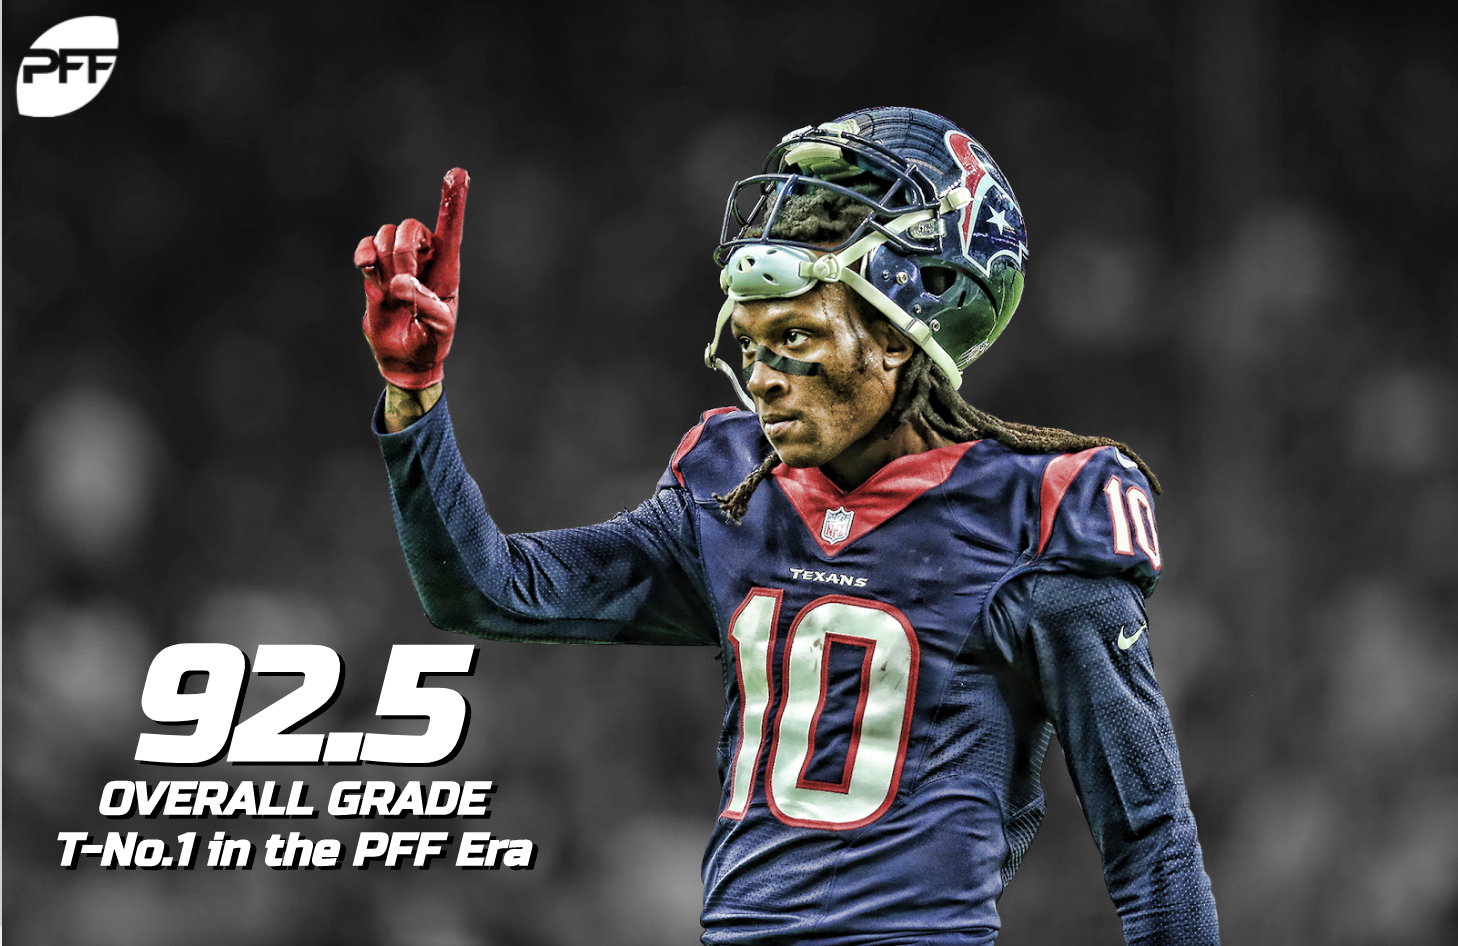 DeAndre Hopkins standing tall as the NFL's highestgraded wide receiver